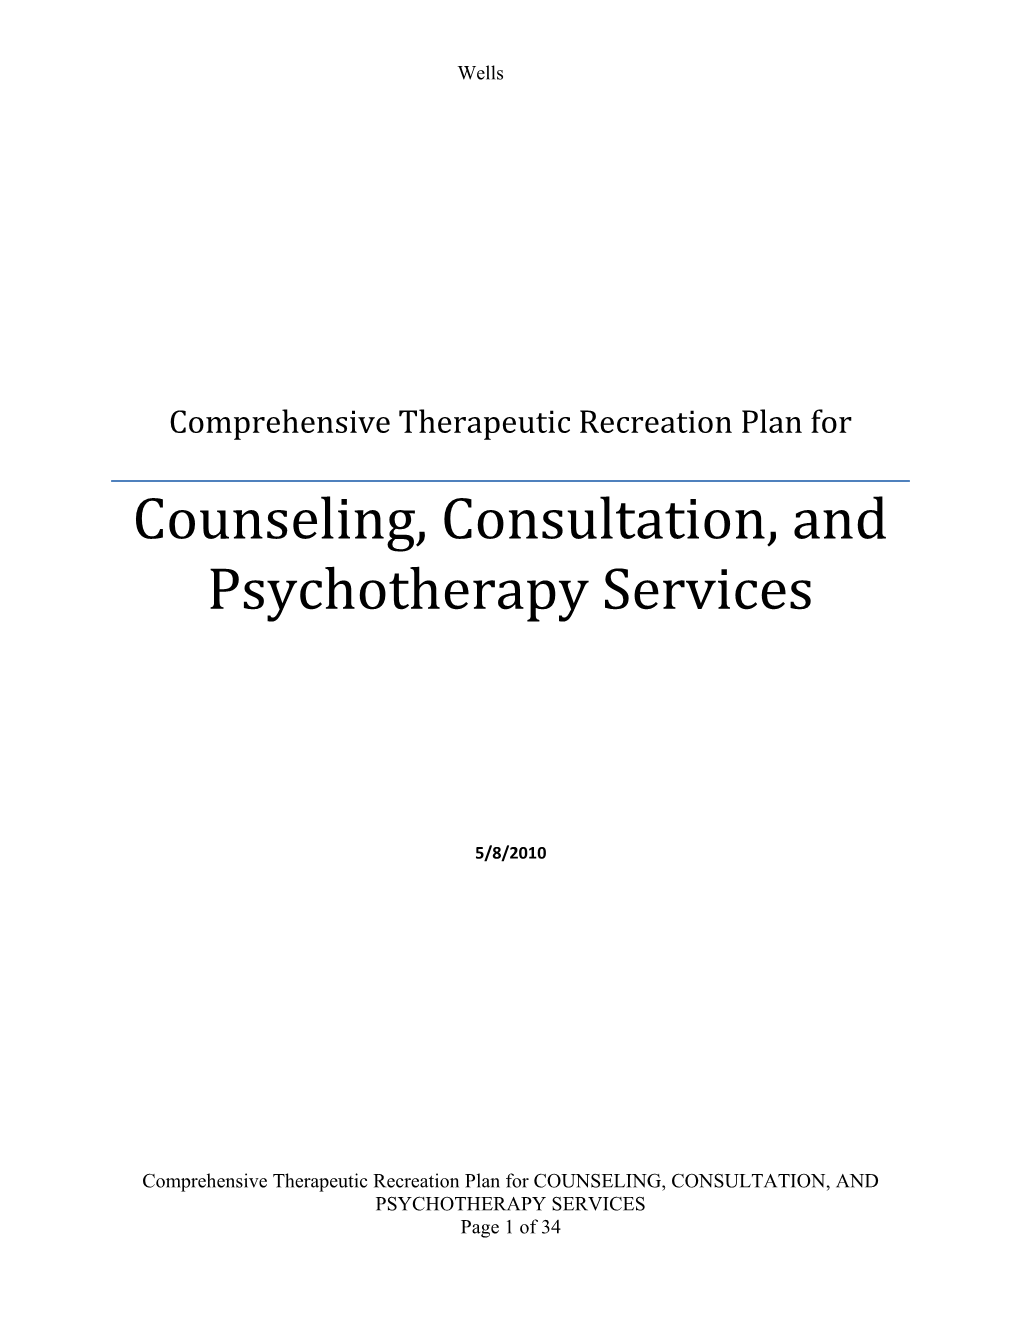 Comprehensive Therapeutic Recreation Plan For